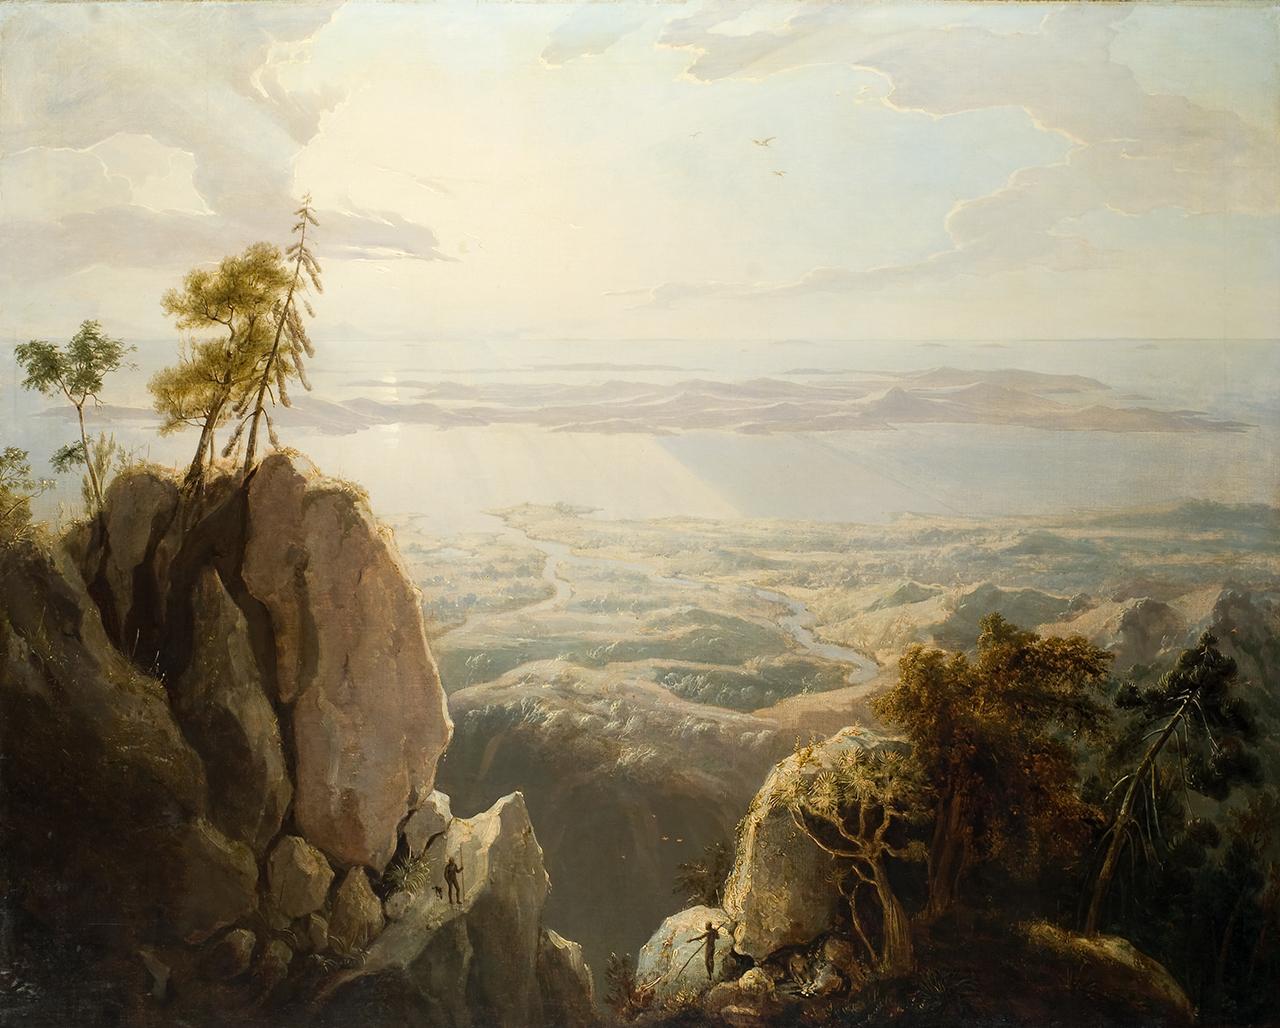 An oil painting of a mountain landscape in Australia from 1802